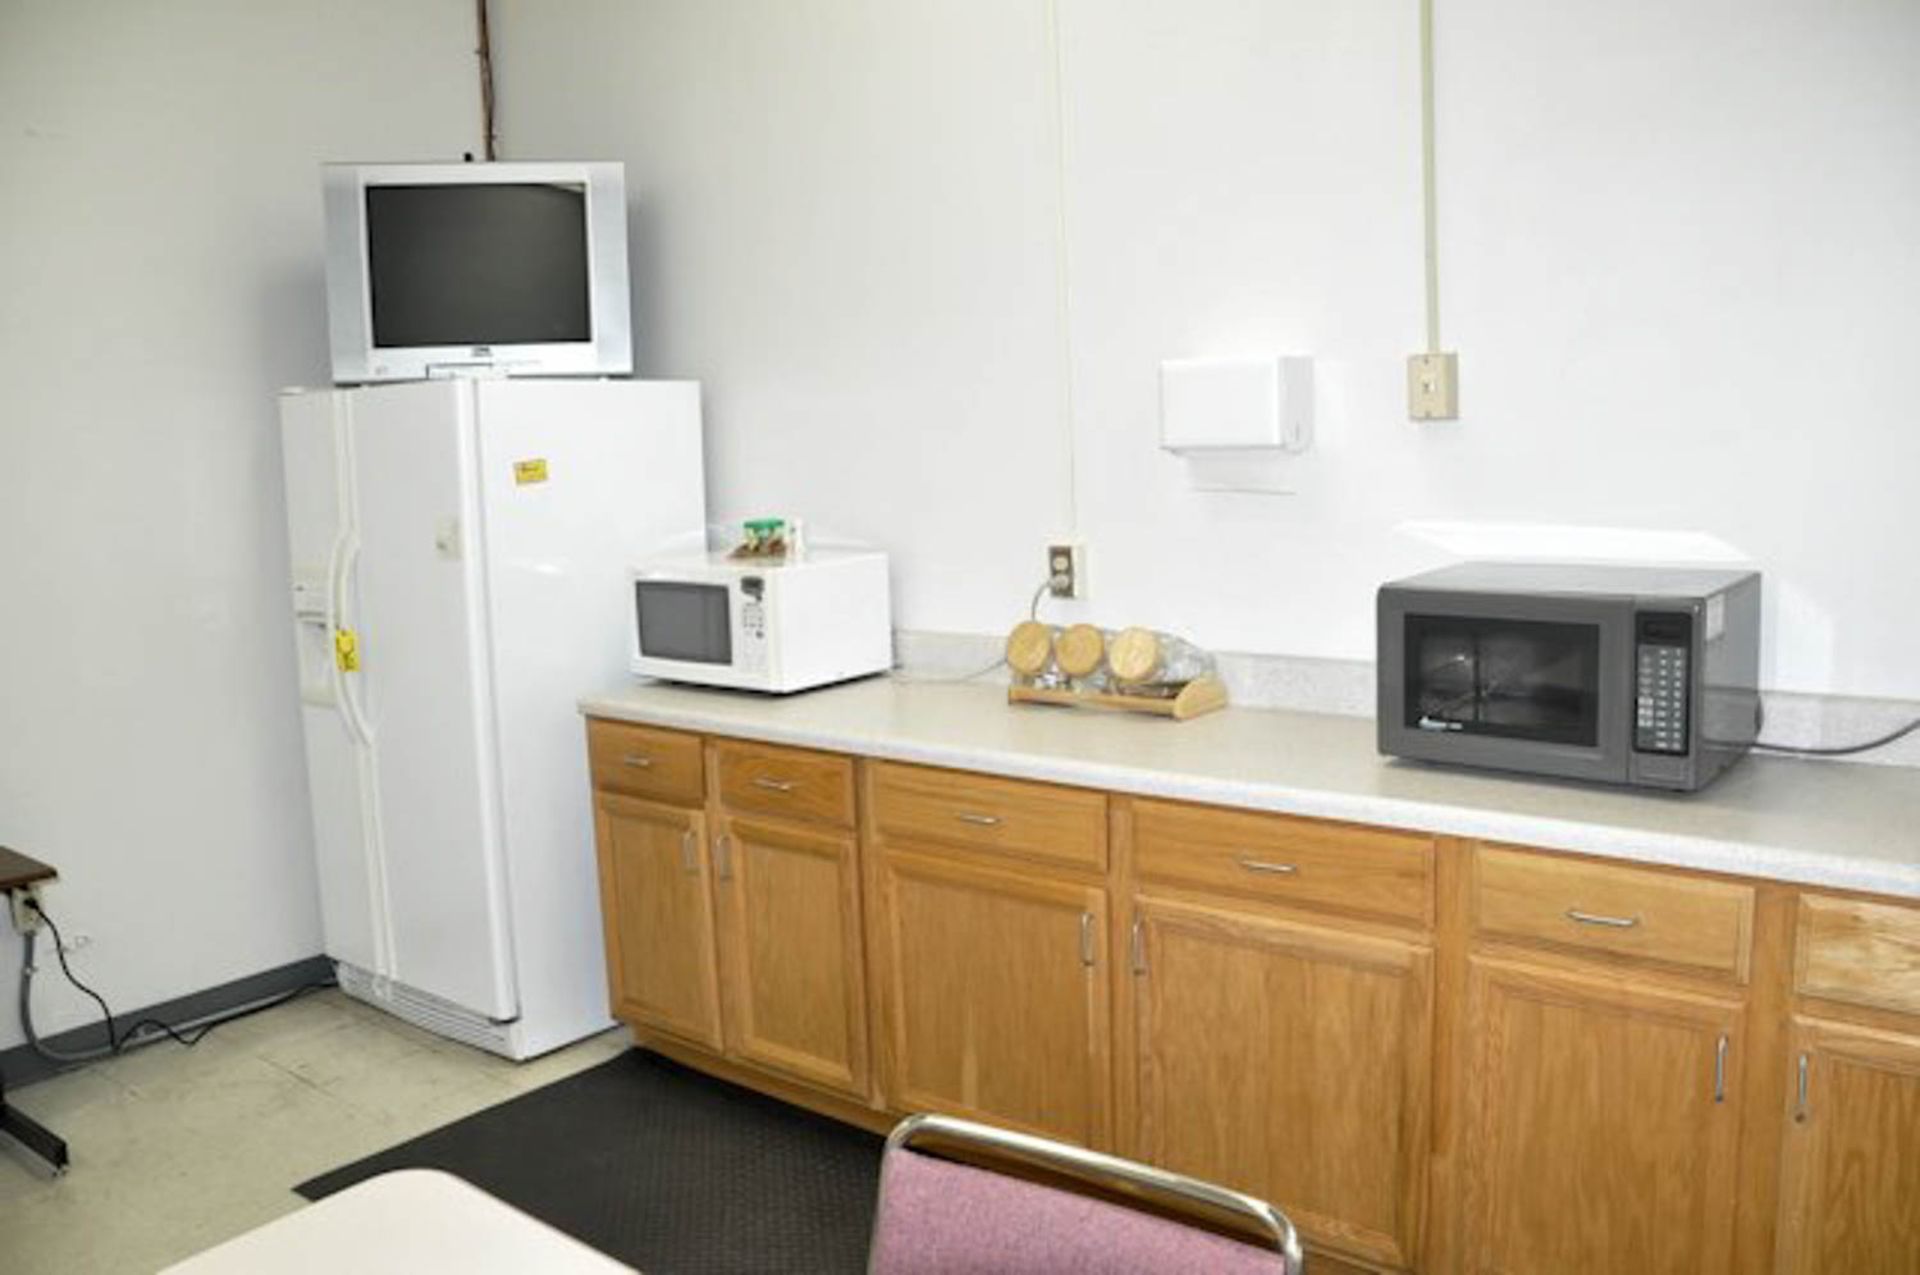 LOT OF (1) REFRIGERATOR, (2) MICROWAVES AND (1) SONY TV